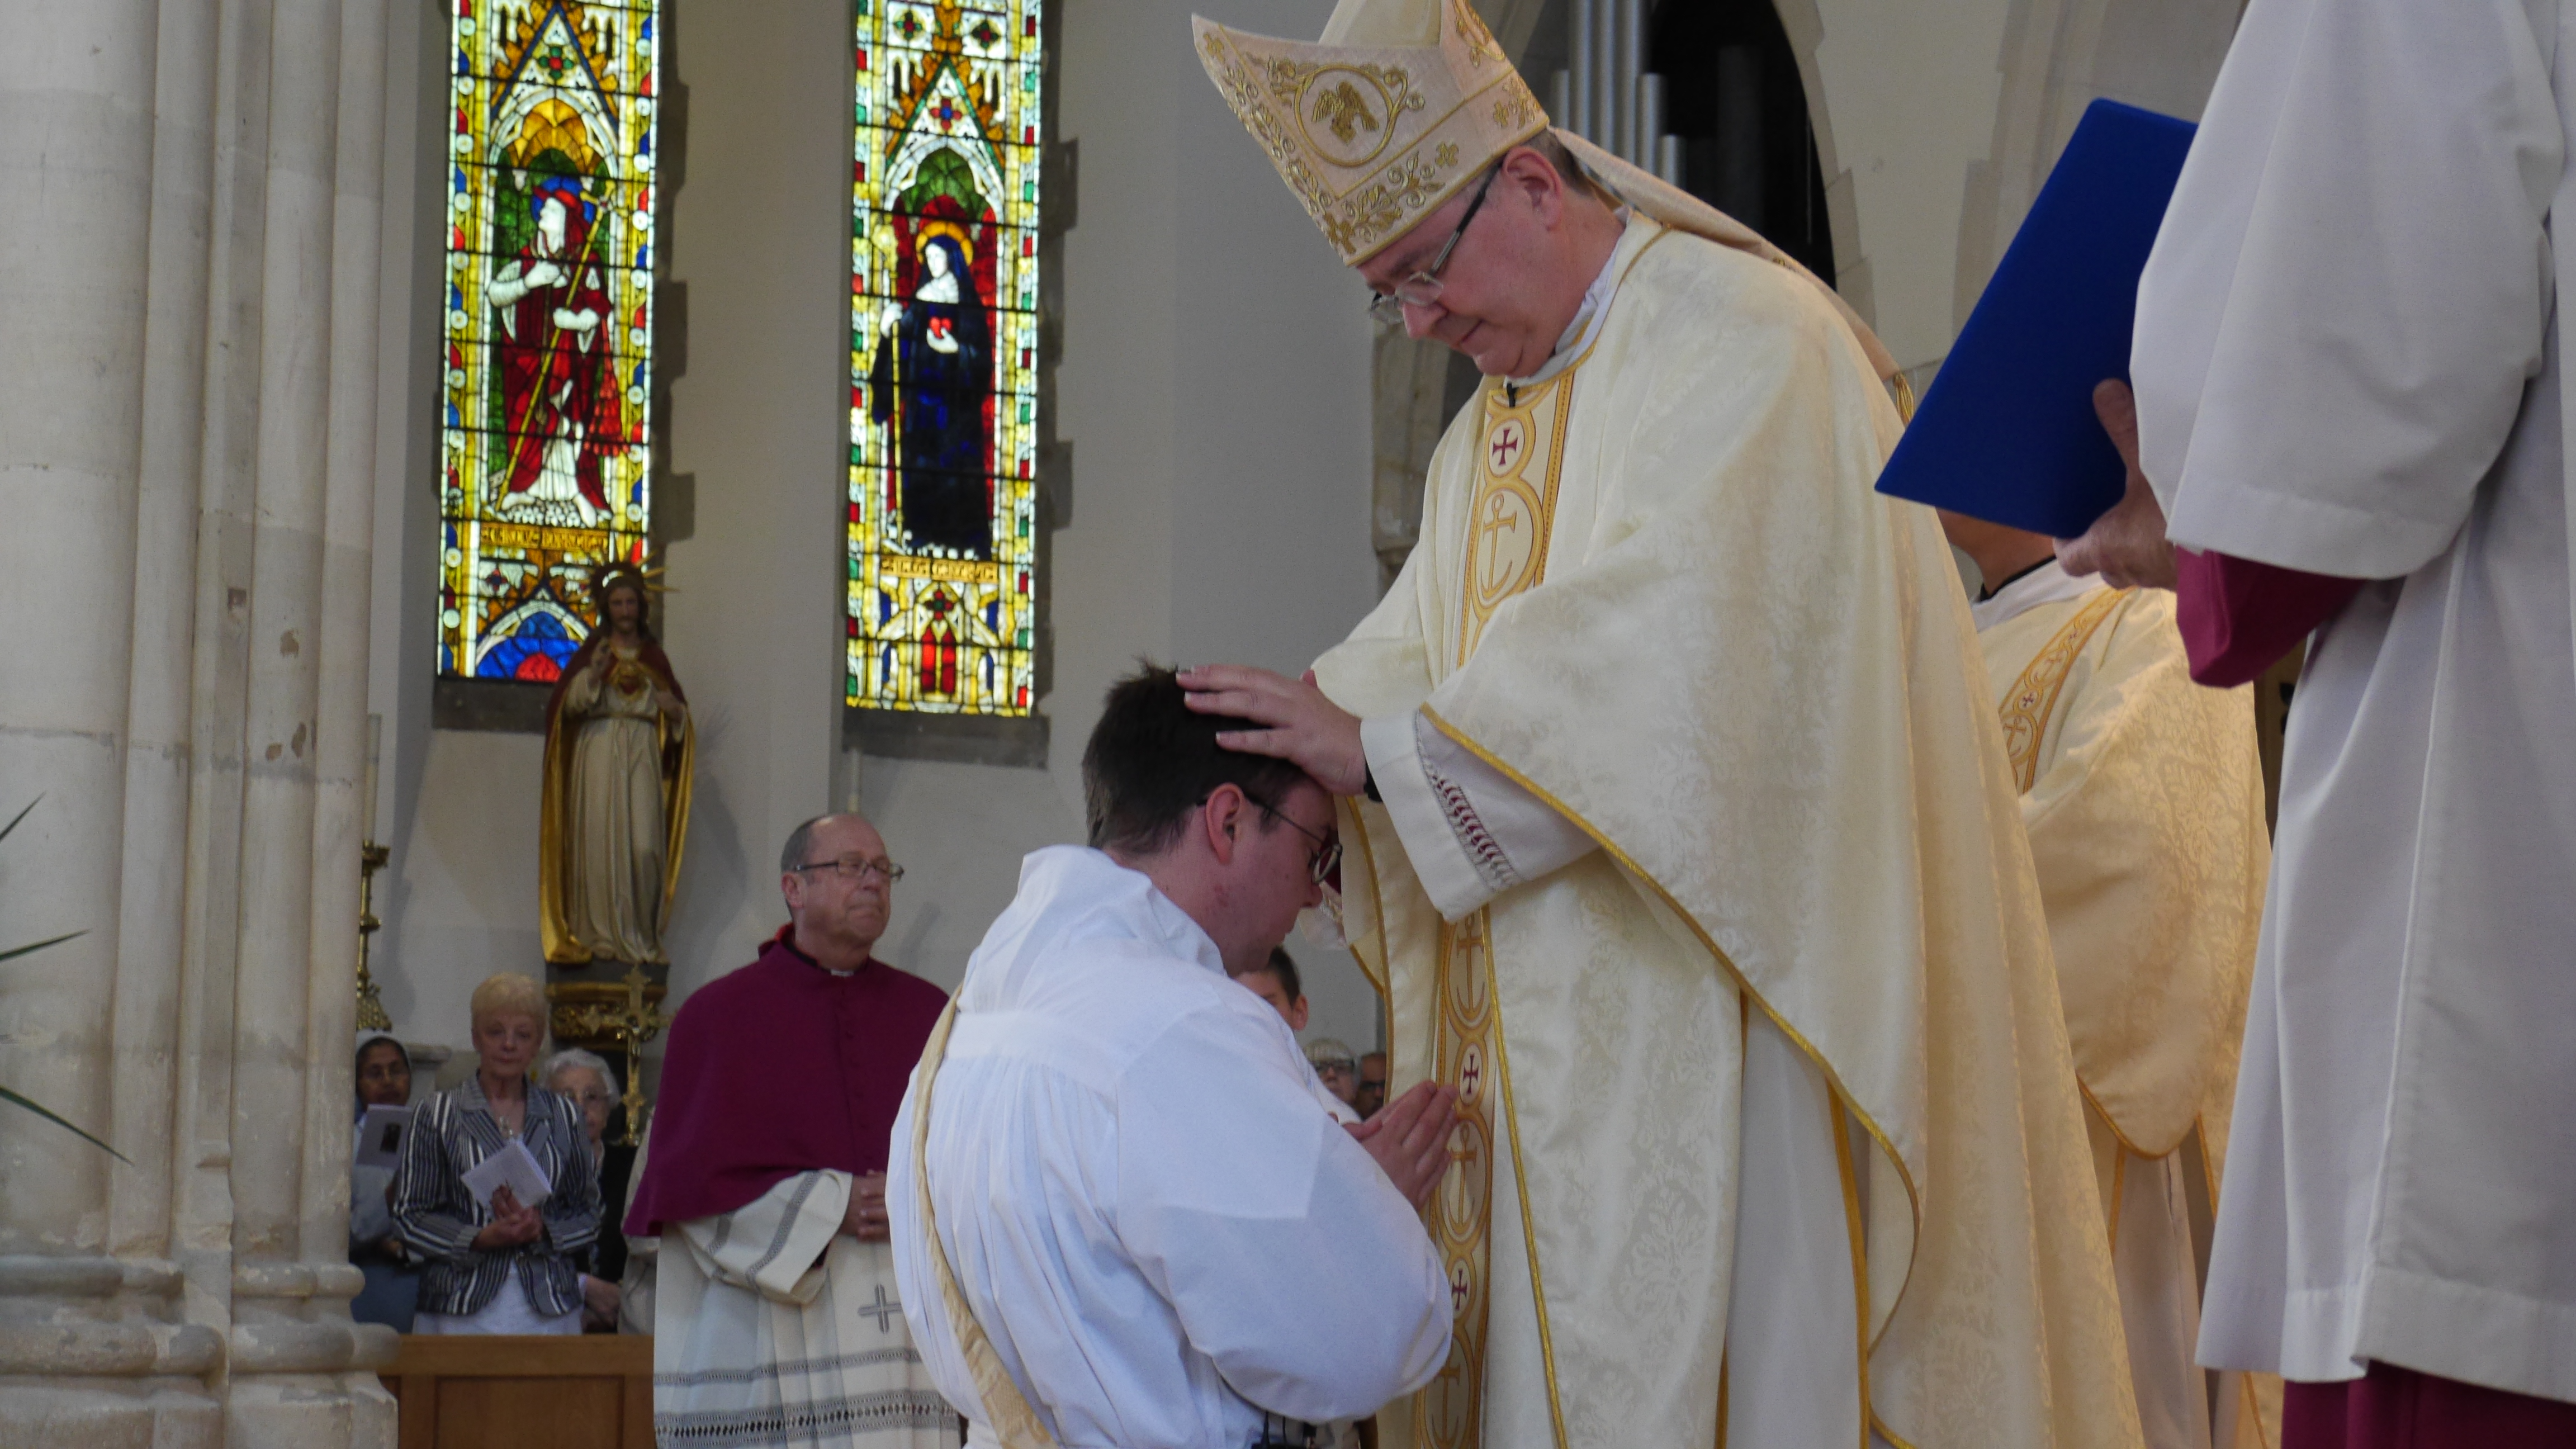 Bishop Mark places his hands on Deacon James head and recites the Prayer of Ordination. At this moment, the bishop confers the Holy Spirit upon him and Deacon James becomes Fr James Barber